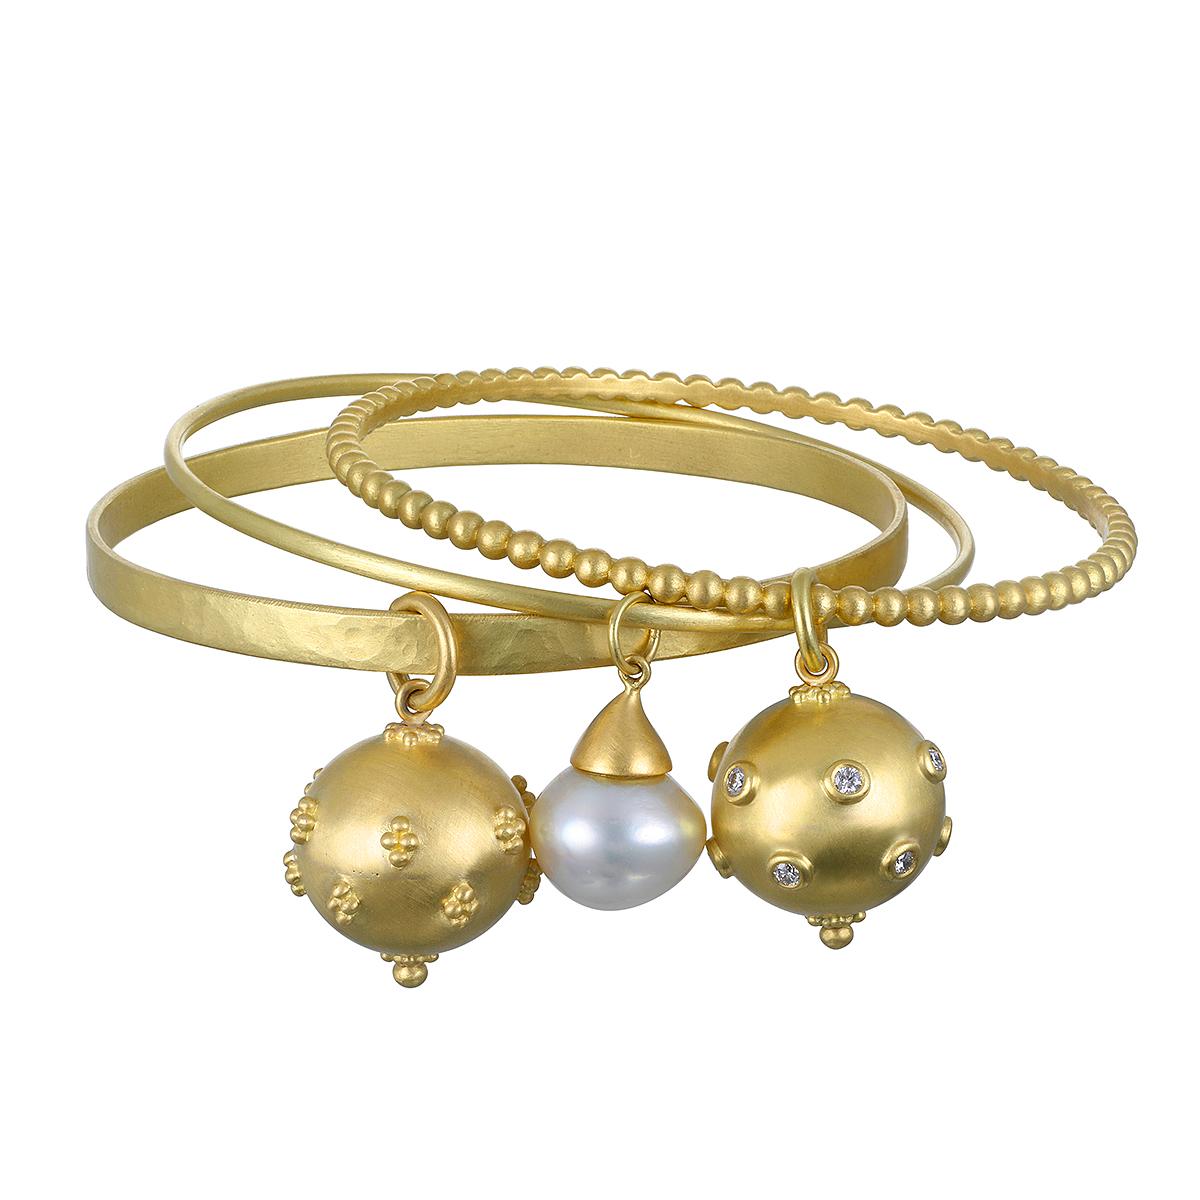 Handmade in 18k gold*, hammered flat bangle with granulation bead ball charm...whimsical yet timeless, this charm with its bangle, will brighten up any outfit, from casual to formal, and can be stacked with other bangles.

*In Faye Kim's signature